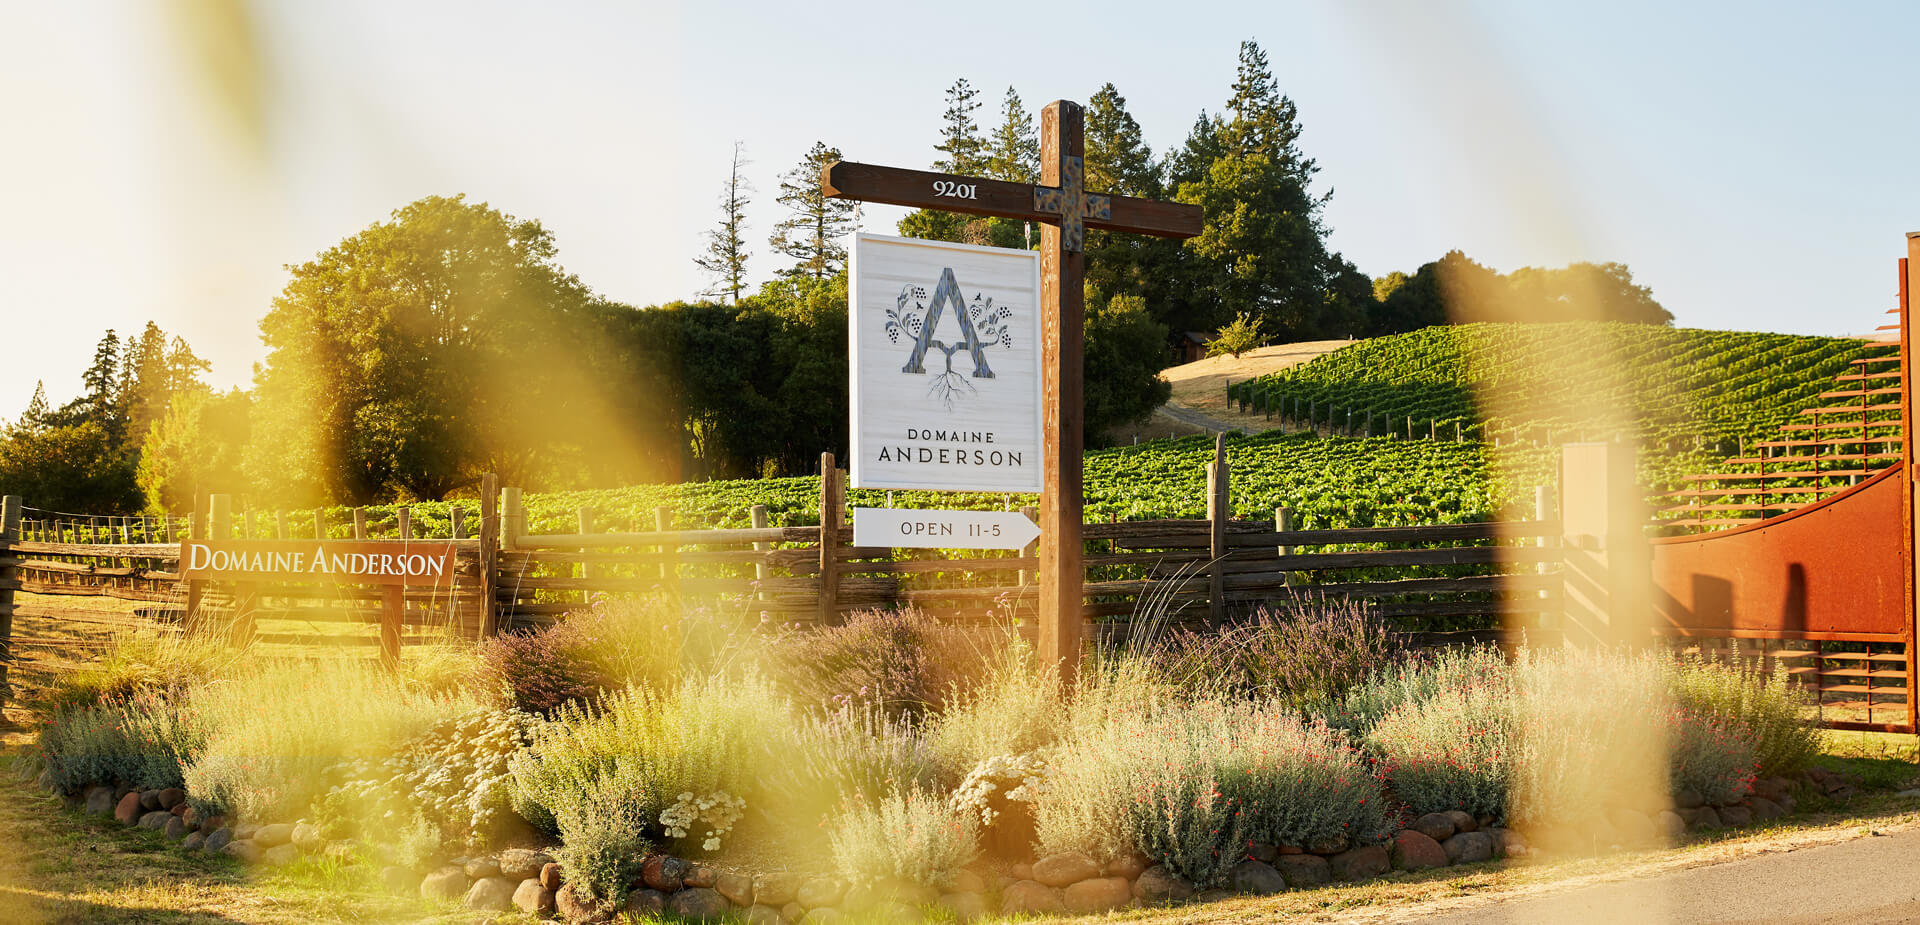 Entrance to Domaine Anderson Winery highlighted by a sign, photographed through tall grass.